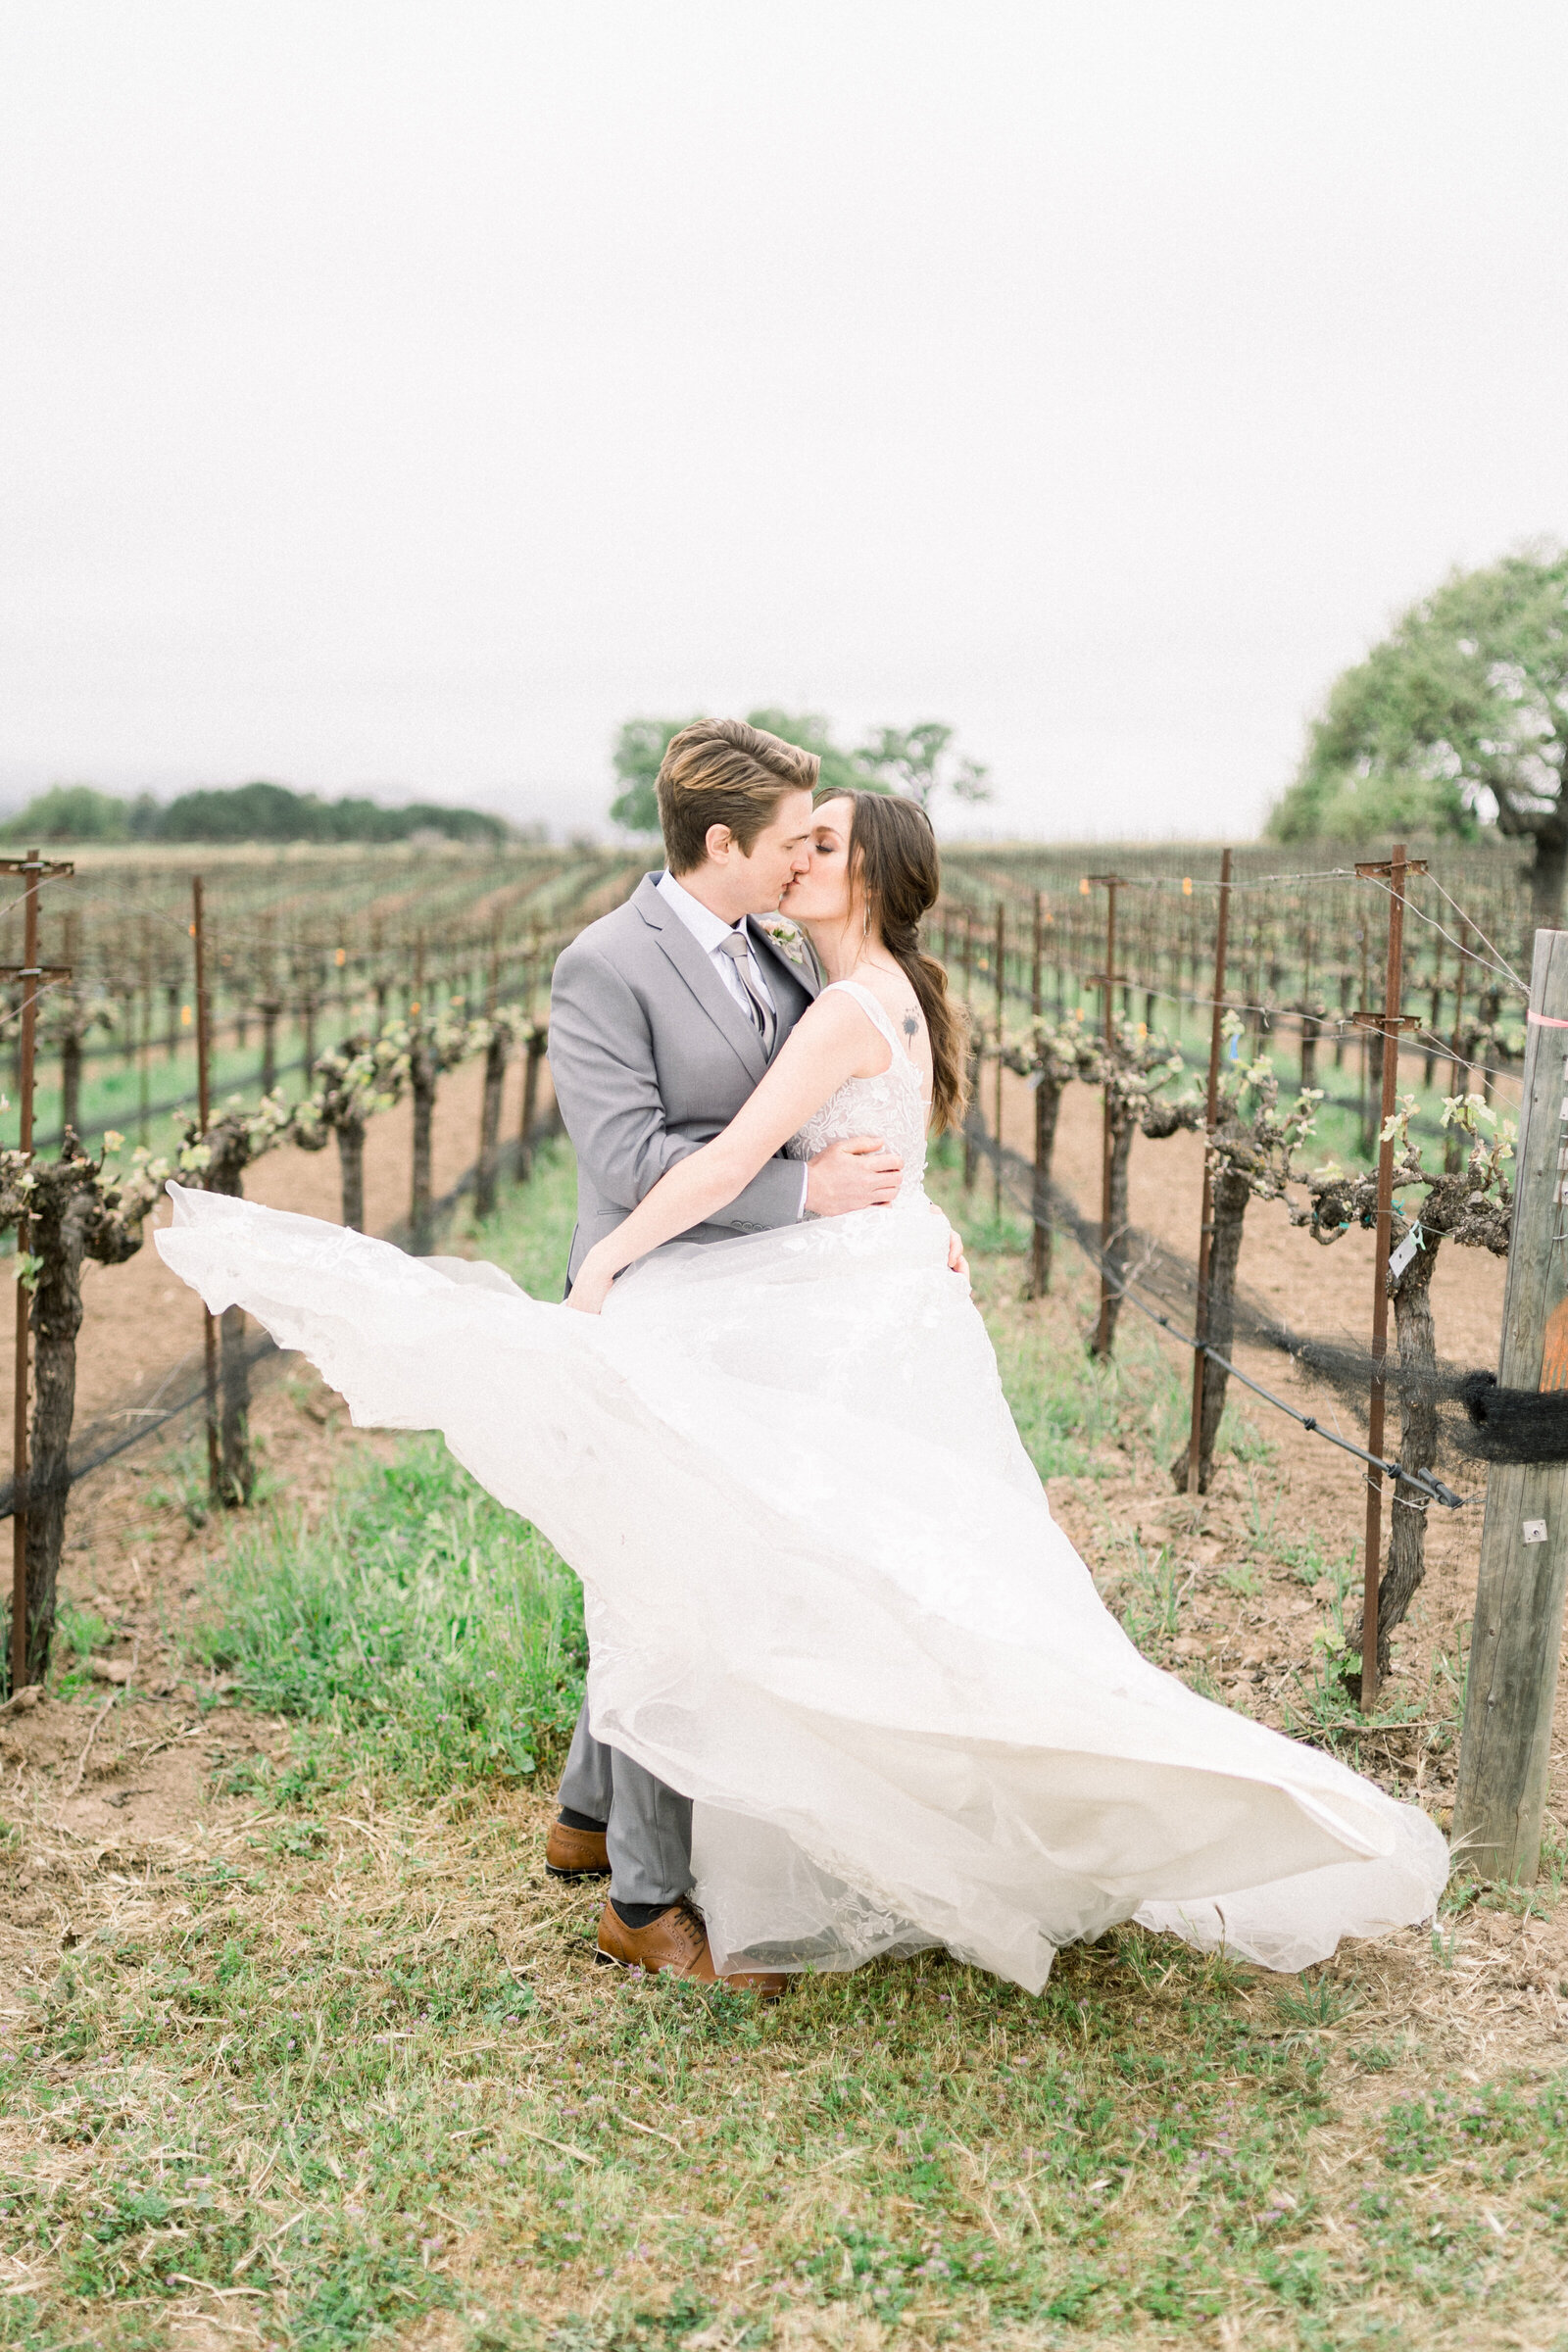 This romantic image by Tiffany Longeway features a bride and groom sharing a kiss in the vineyards of Sunstone Winery in Santa Ynez, CA, capturing the essence of vineyard romance.